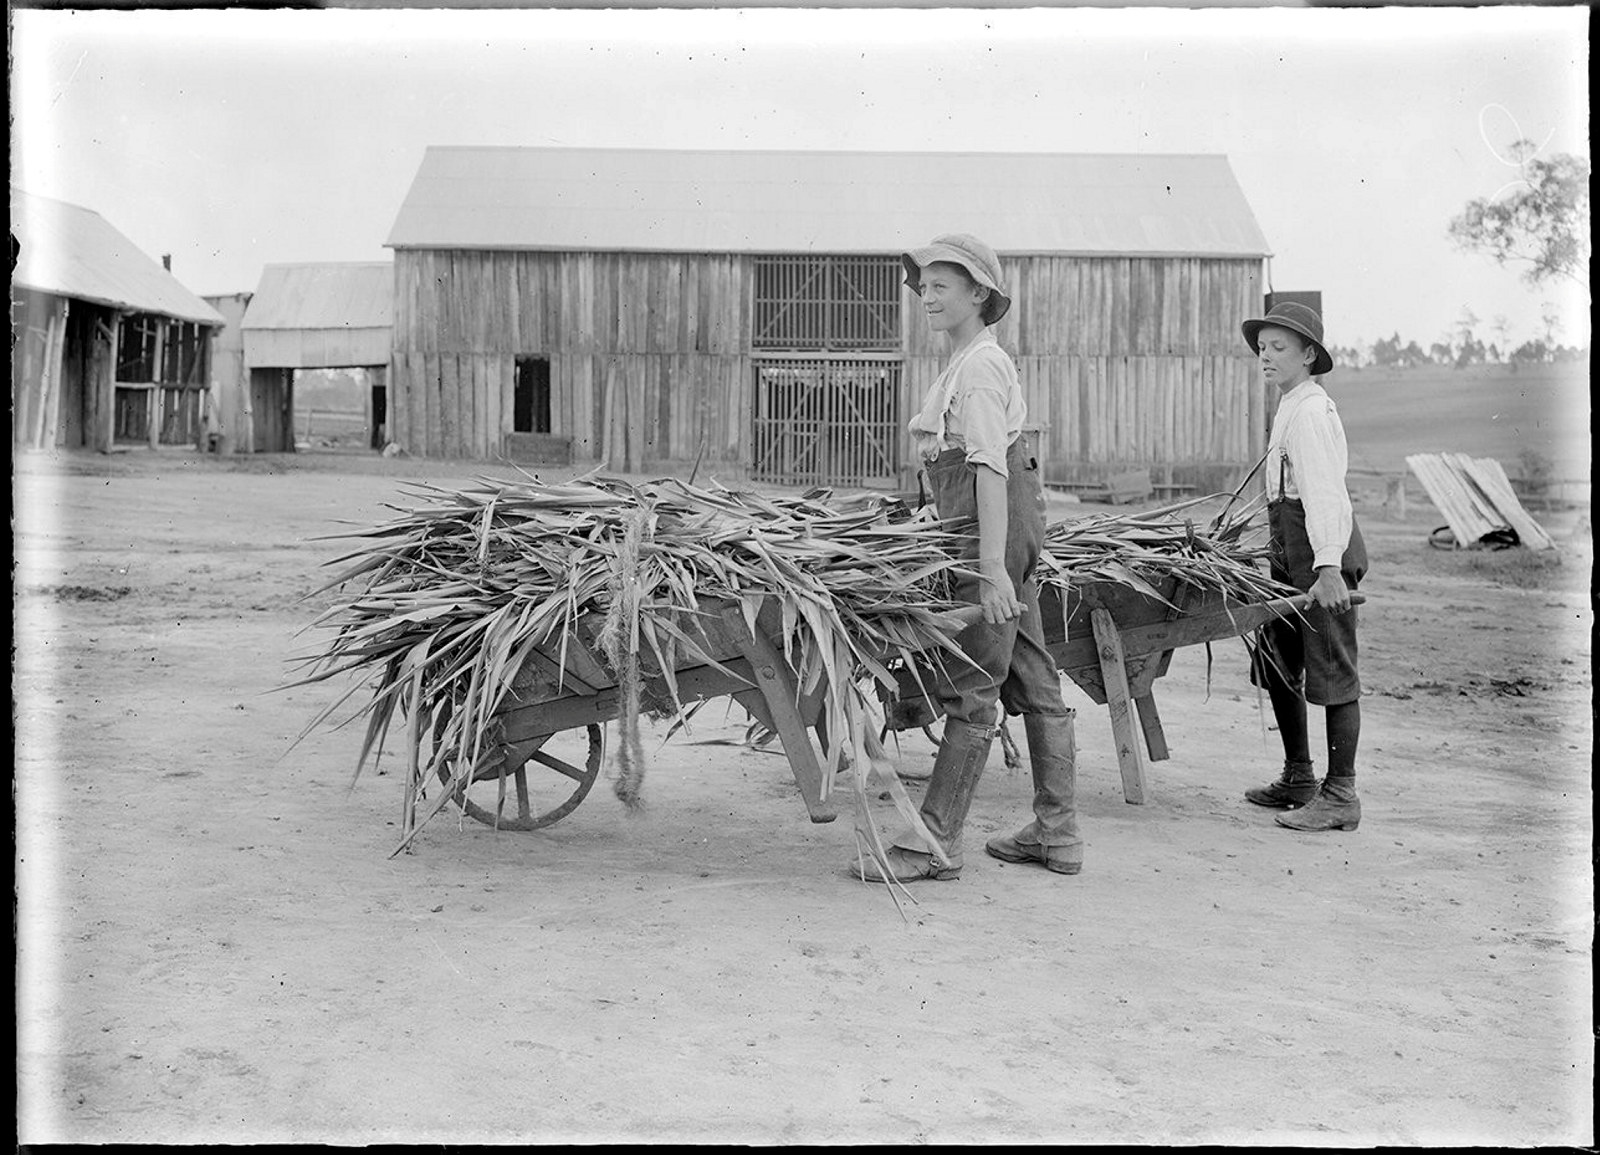 Government Printing Office; NRS 4481, Glass negatives NRS-4481-4-161-[AF00198139] Agricultural College Boys [Department of Agriculture] [no date]